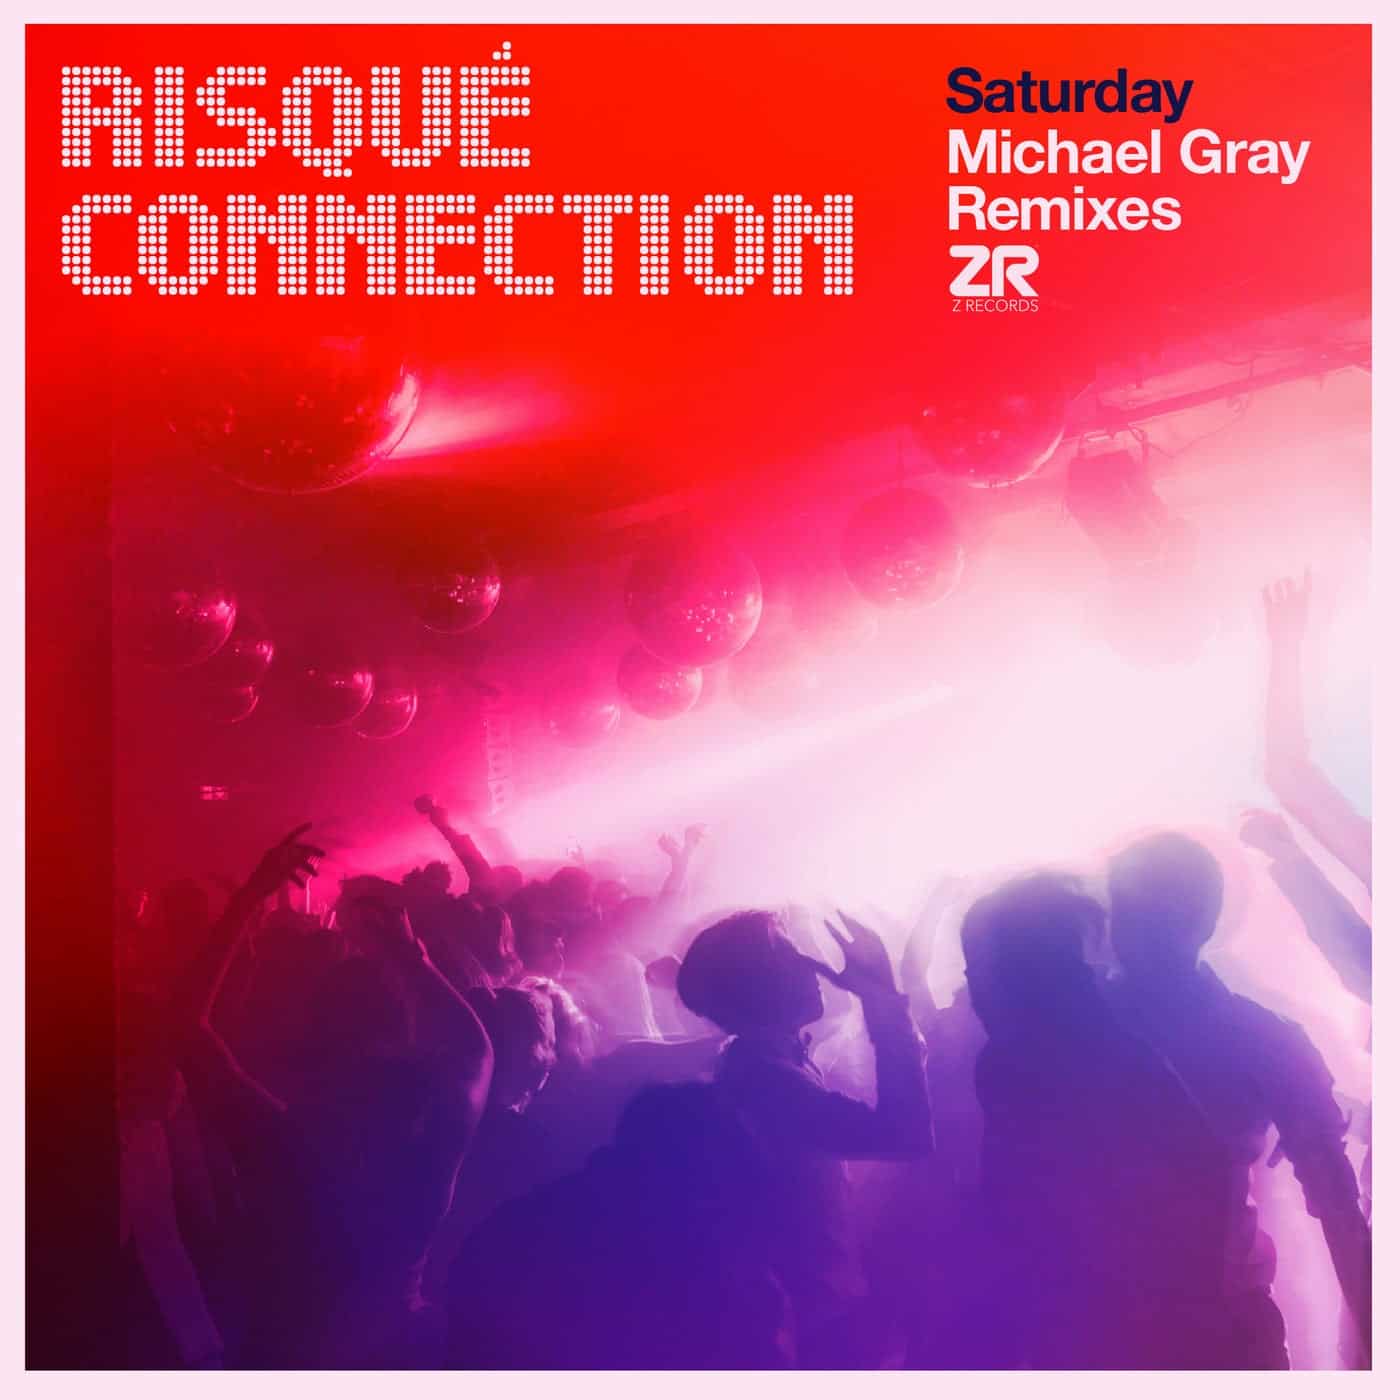 Download Saturday (Michael Gray Remixes) on Electrobuzz